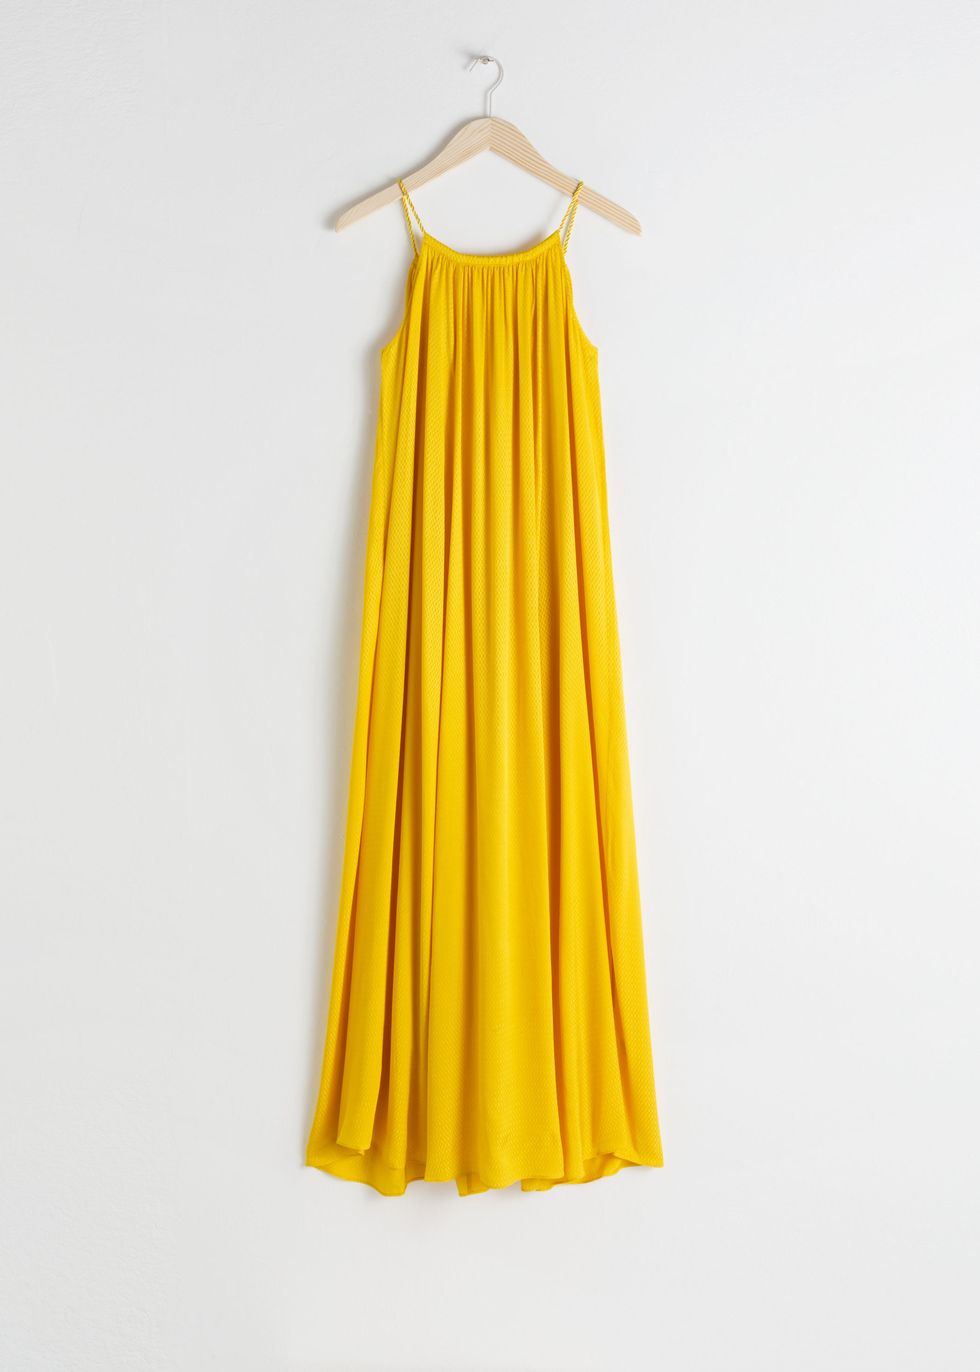 10 yellow dresses that'll give you that summer feeling